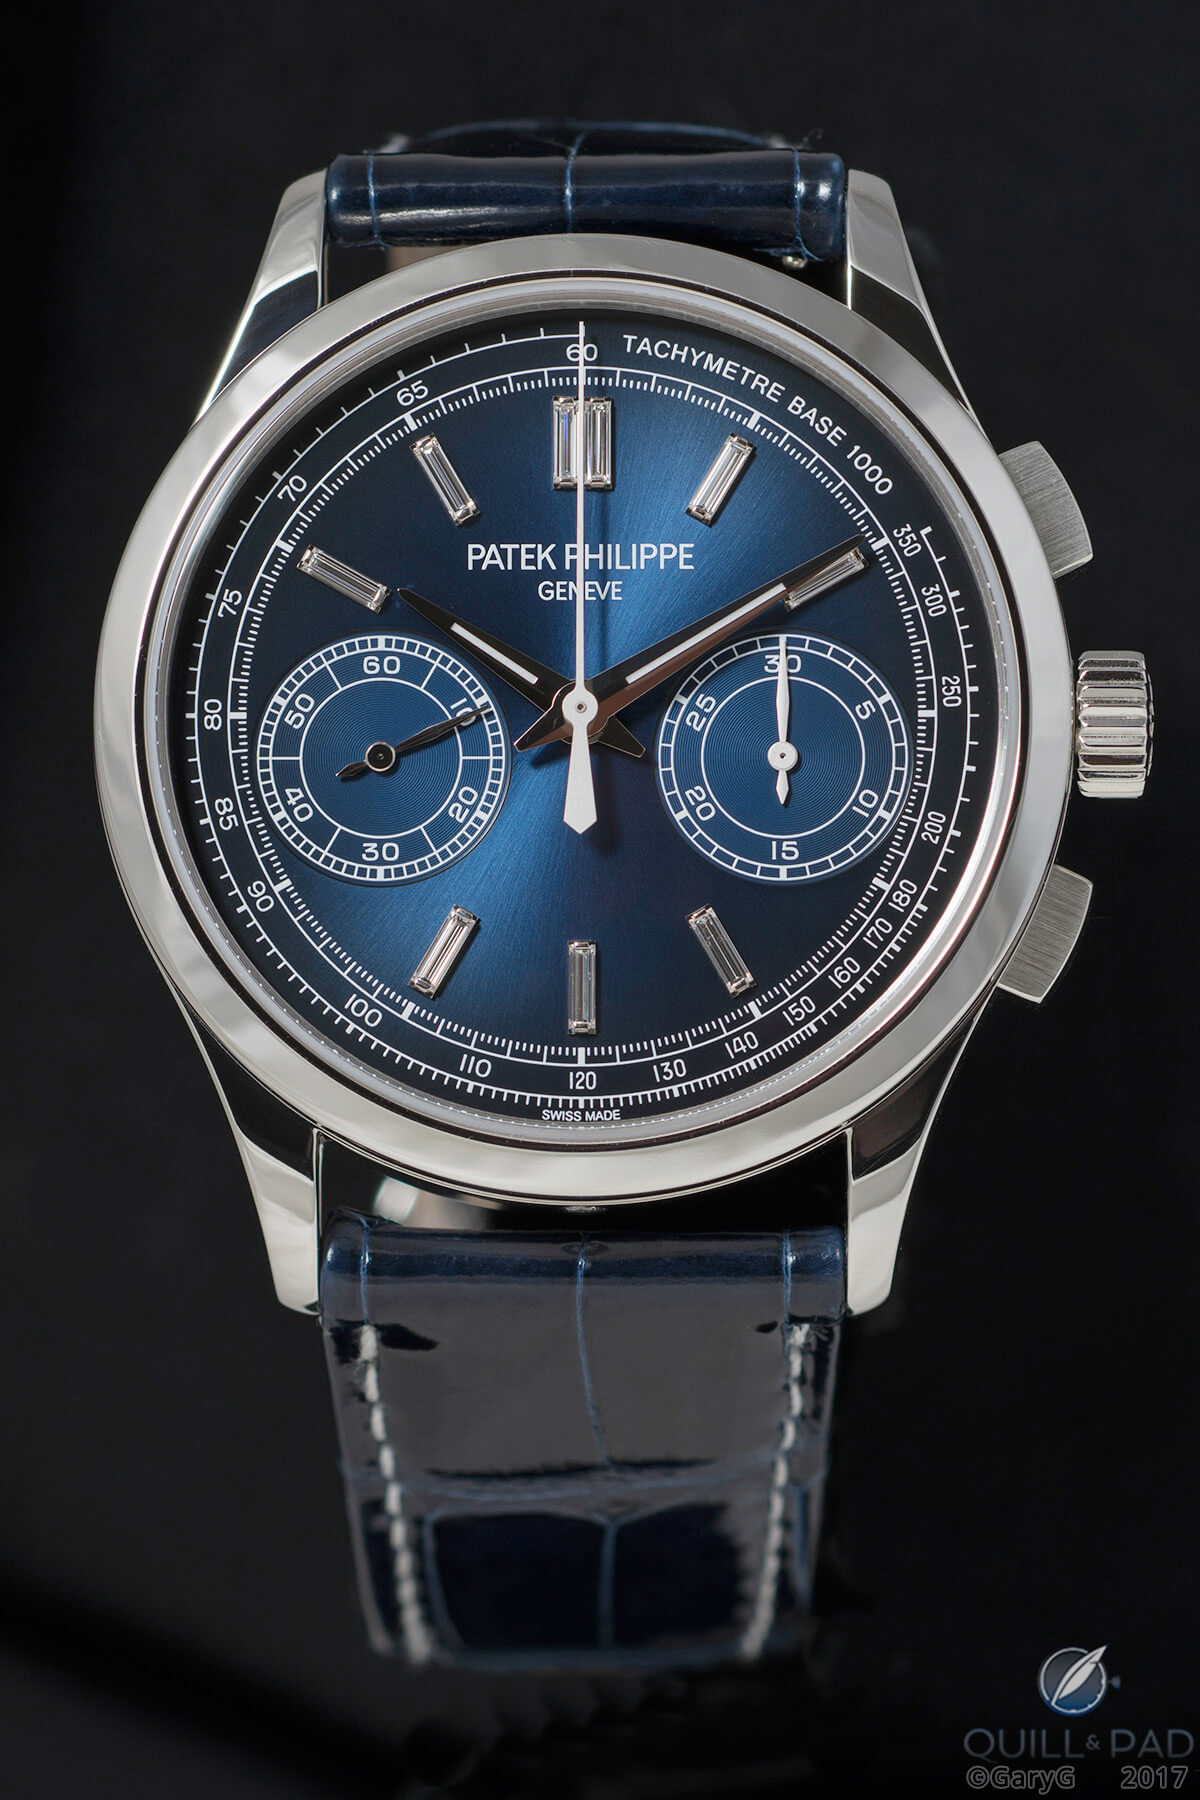 Reference 5170P chronograph from Patek Philippe